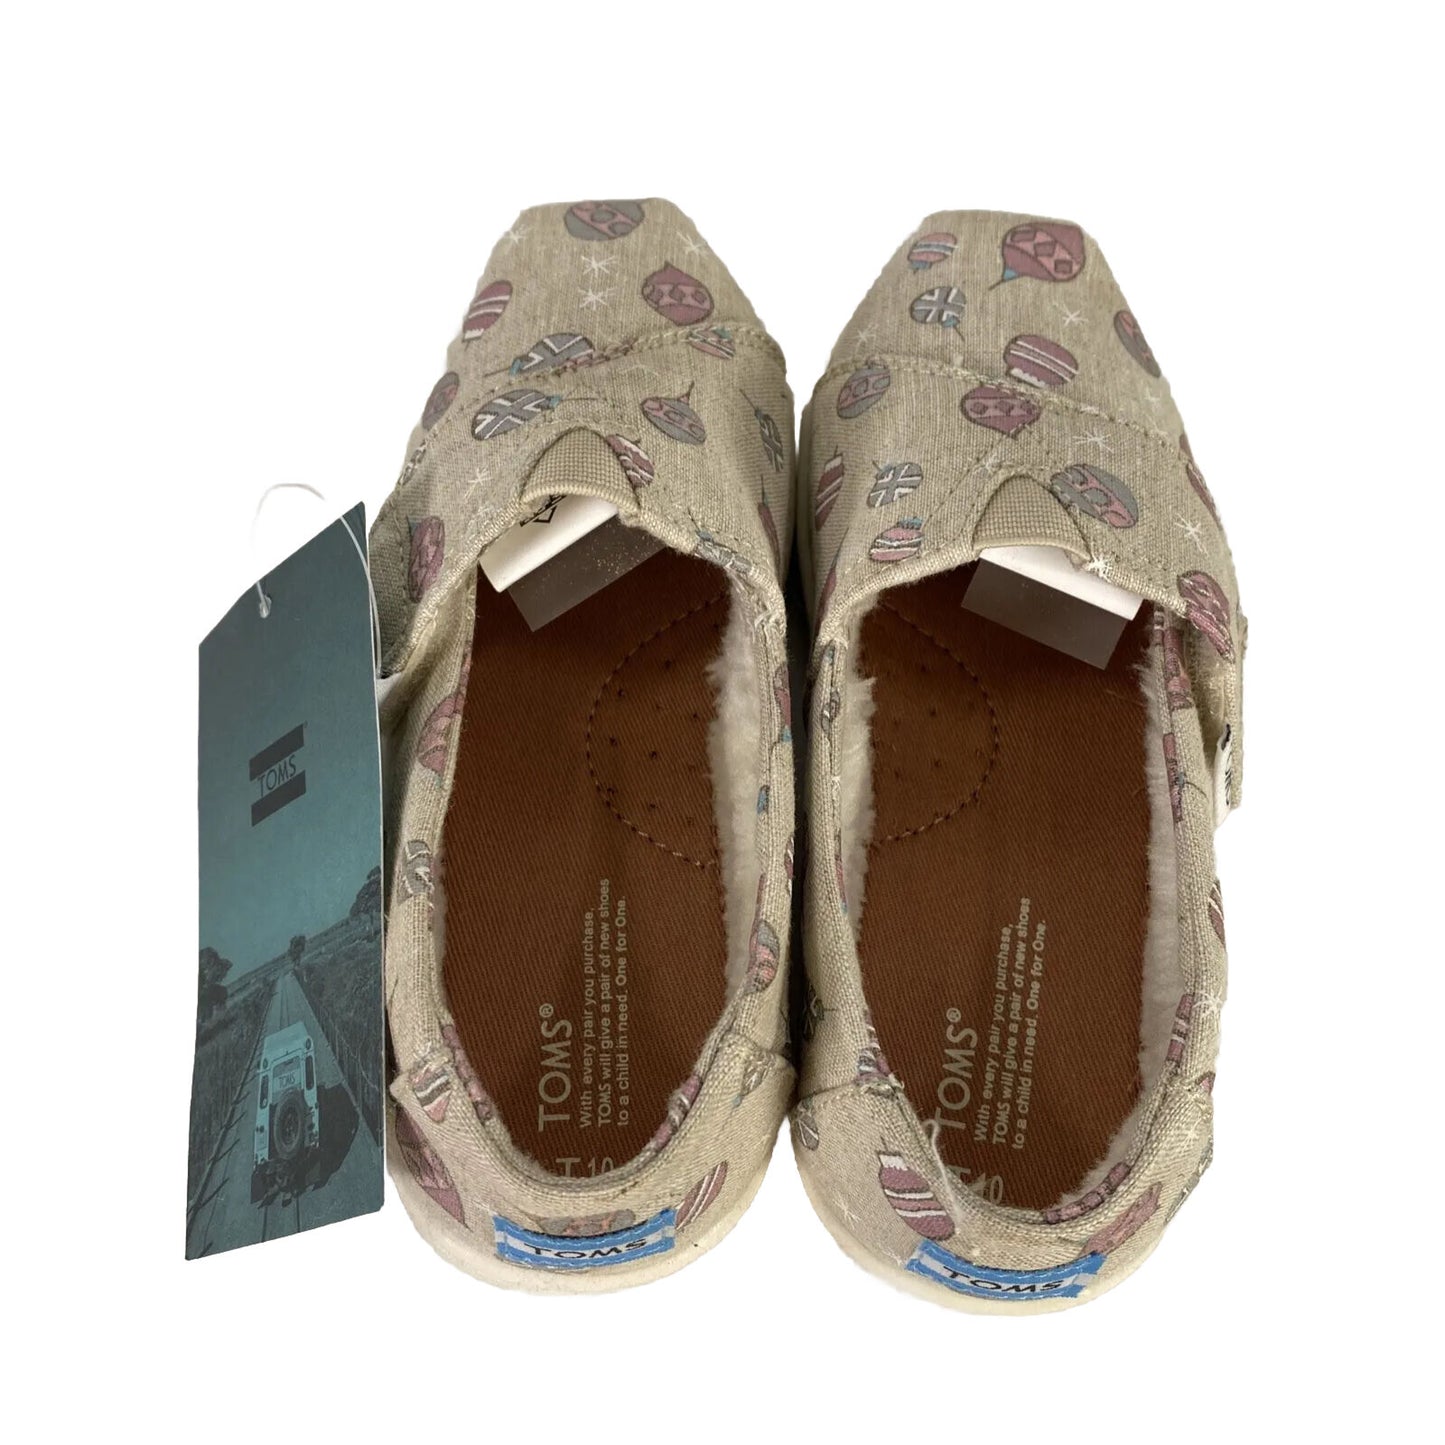 NEW Toms Tiny  Toddler Girls Gray Sparkle Ornament Print Woven Loafers - 10